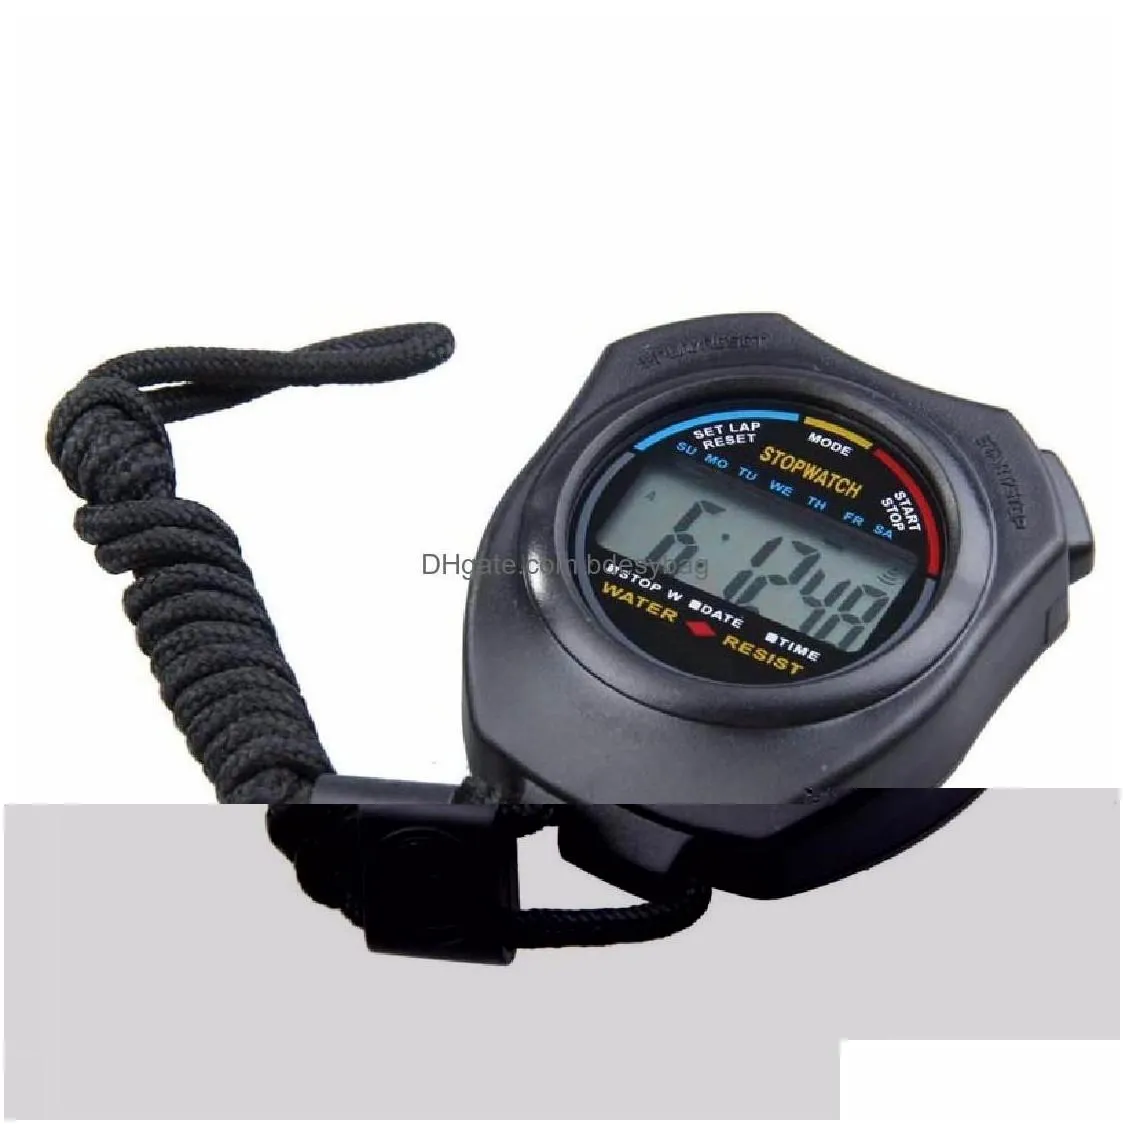 wholesale Timers Abs Waterproof Digital Timer Professional Handheld Lcd Chronograph Sports Stopwatch Stop Watch With String Drop Delivery Offi